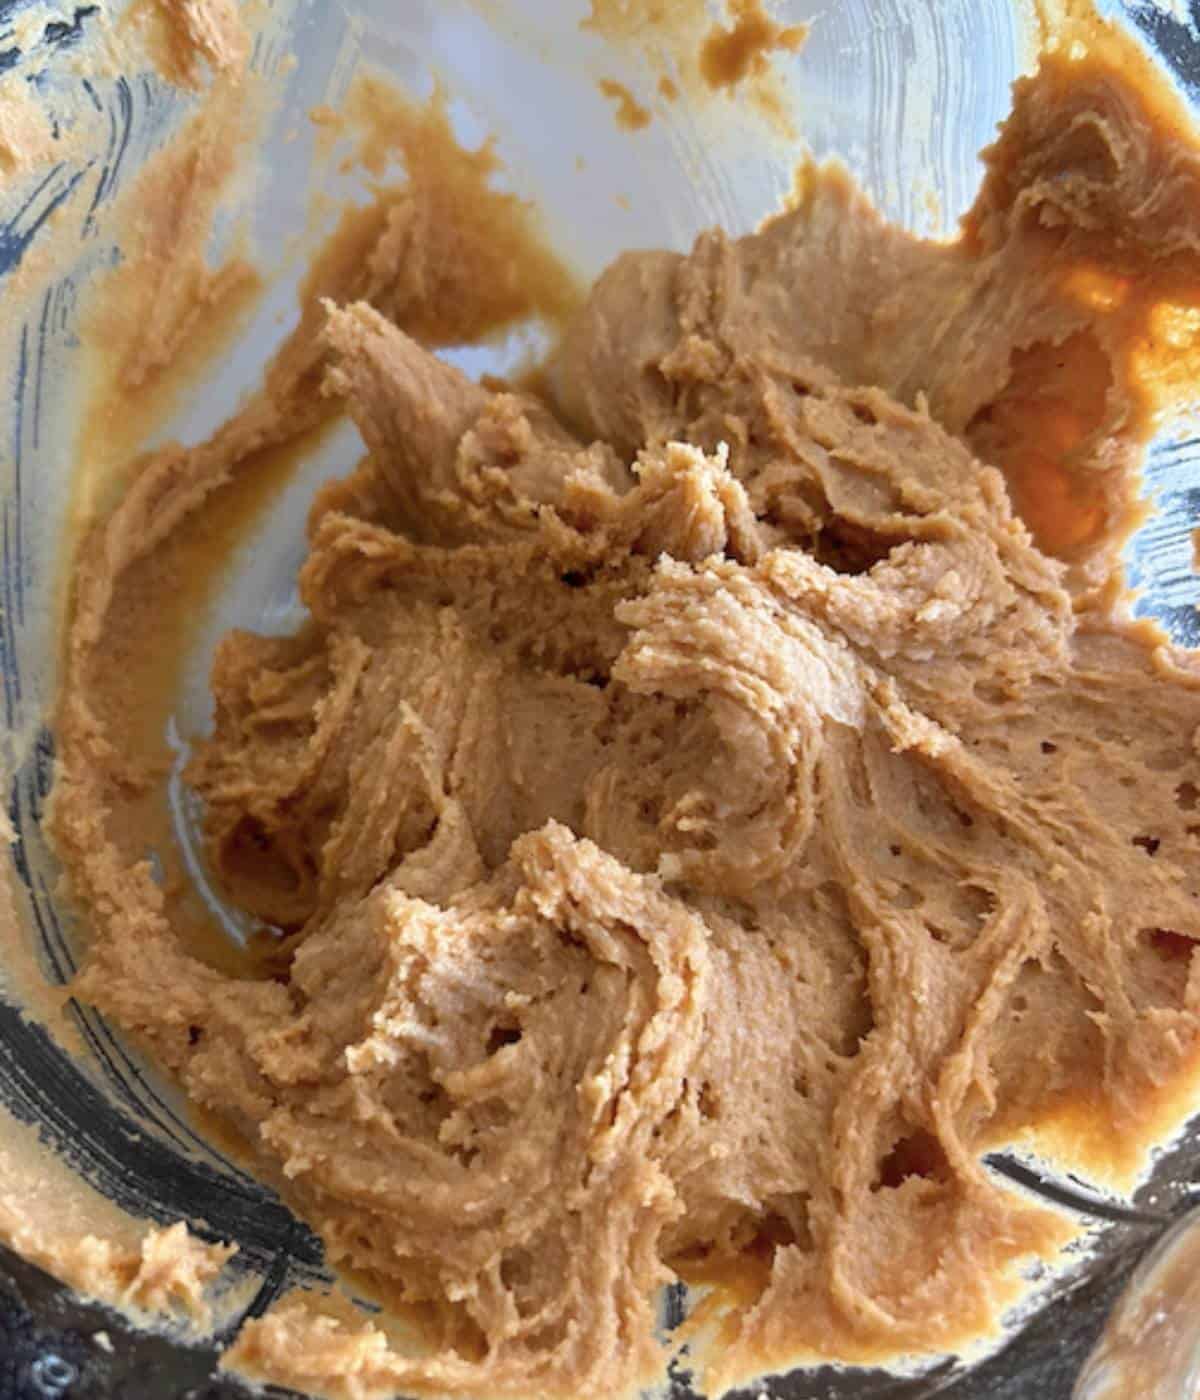 Peanut butter cookie batter in glass bowl.